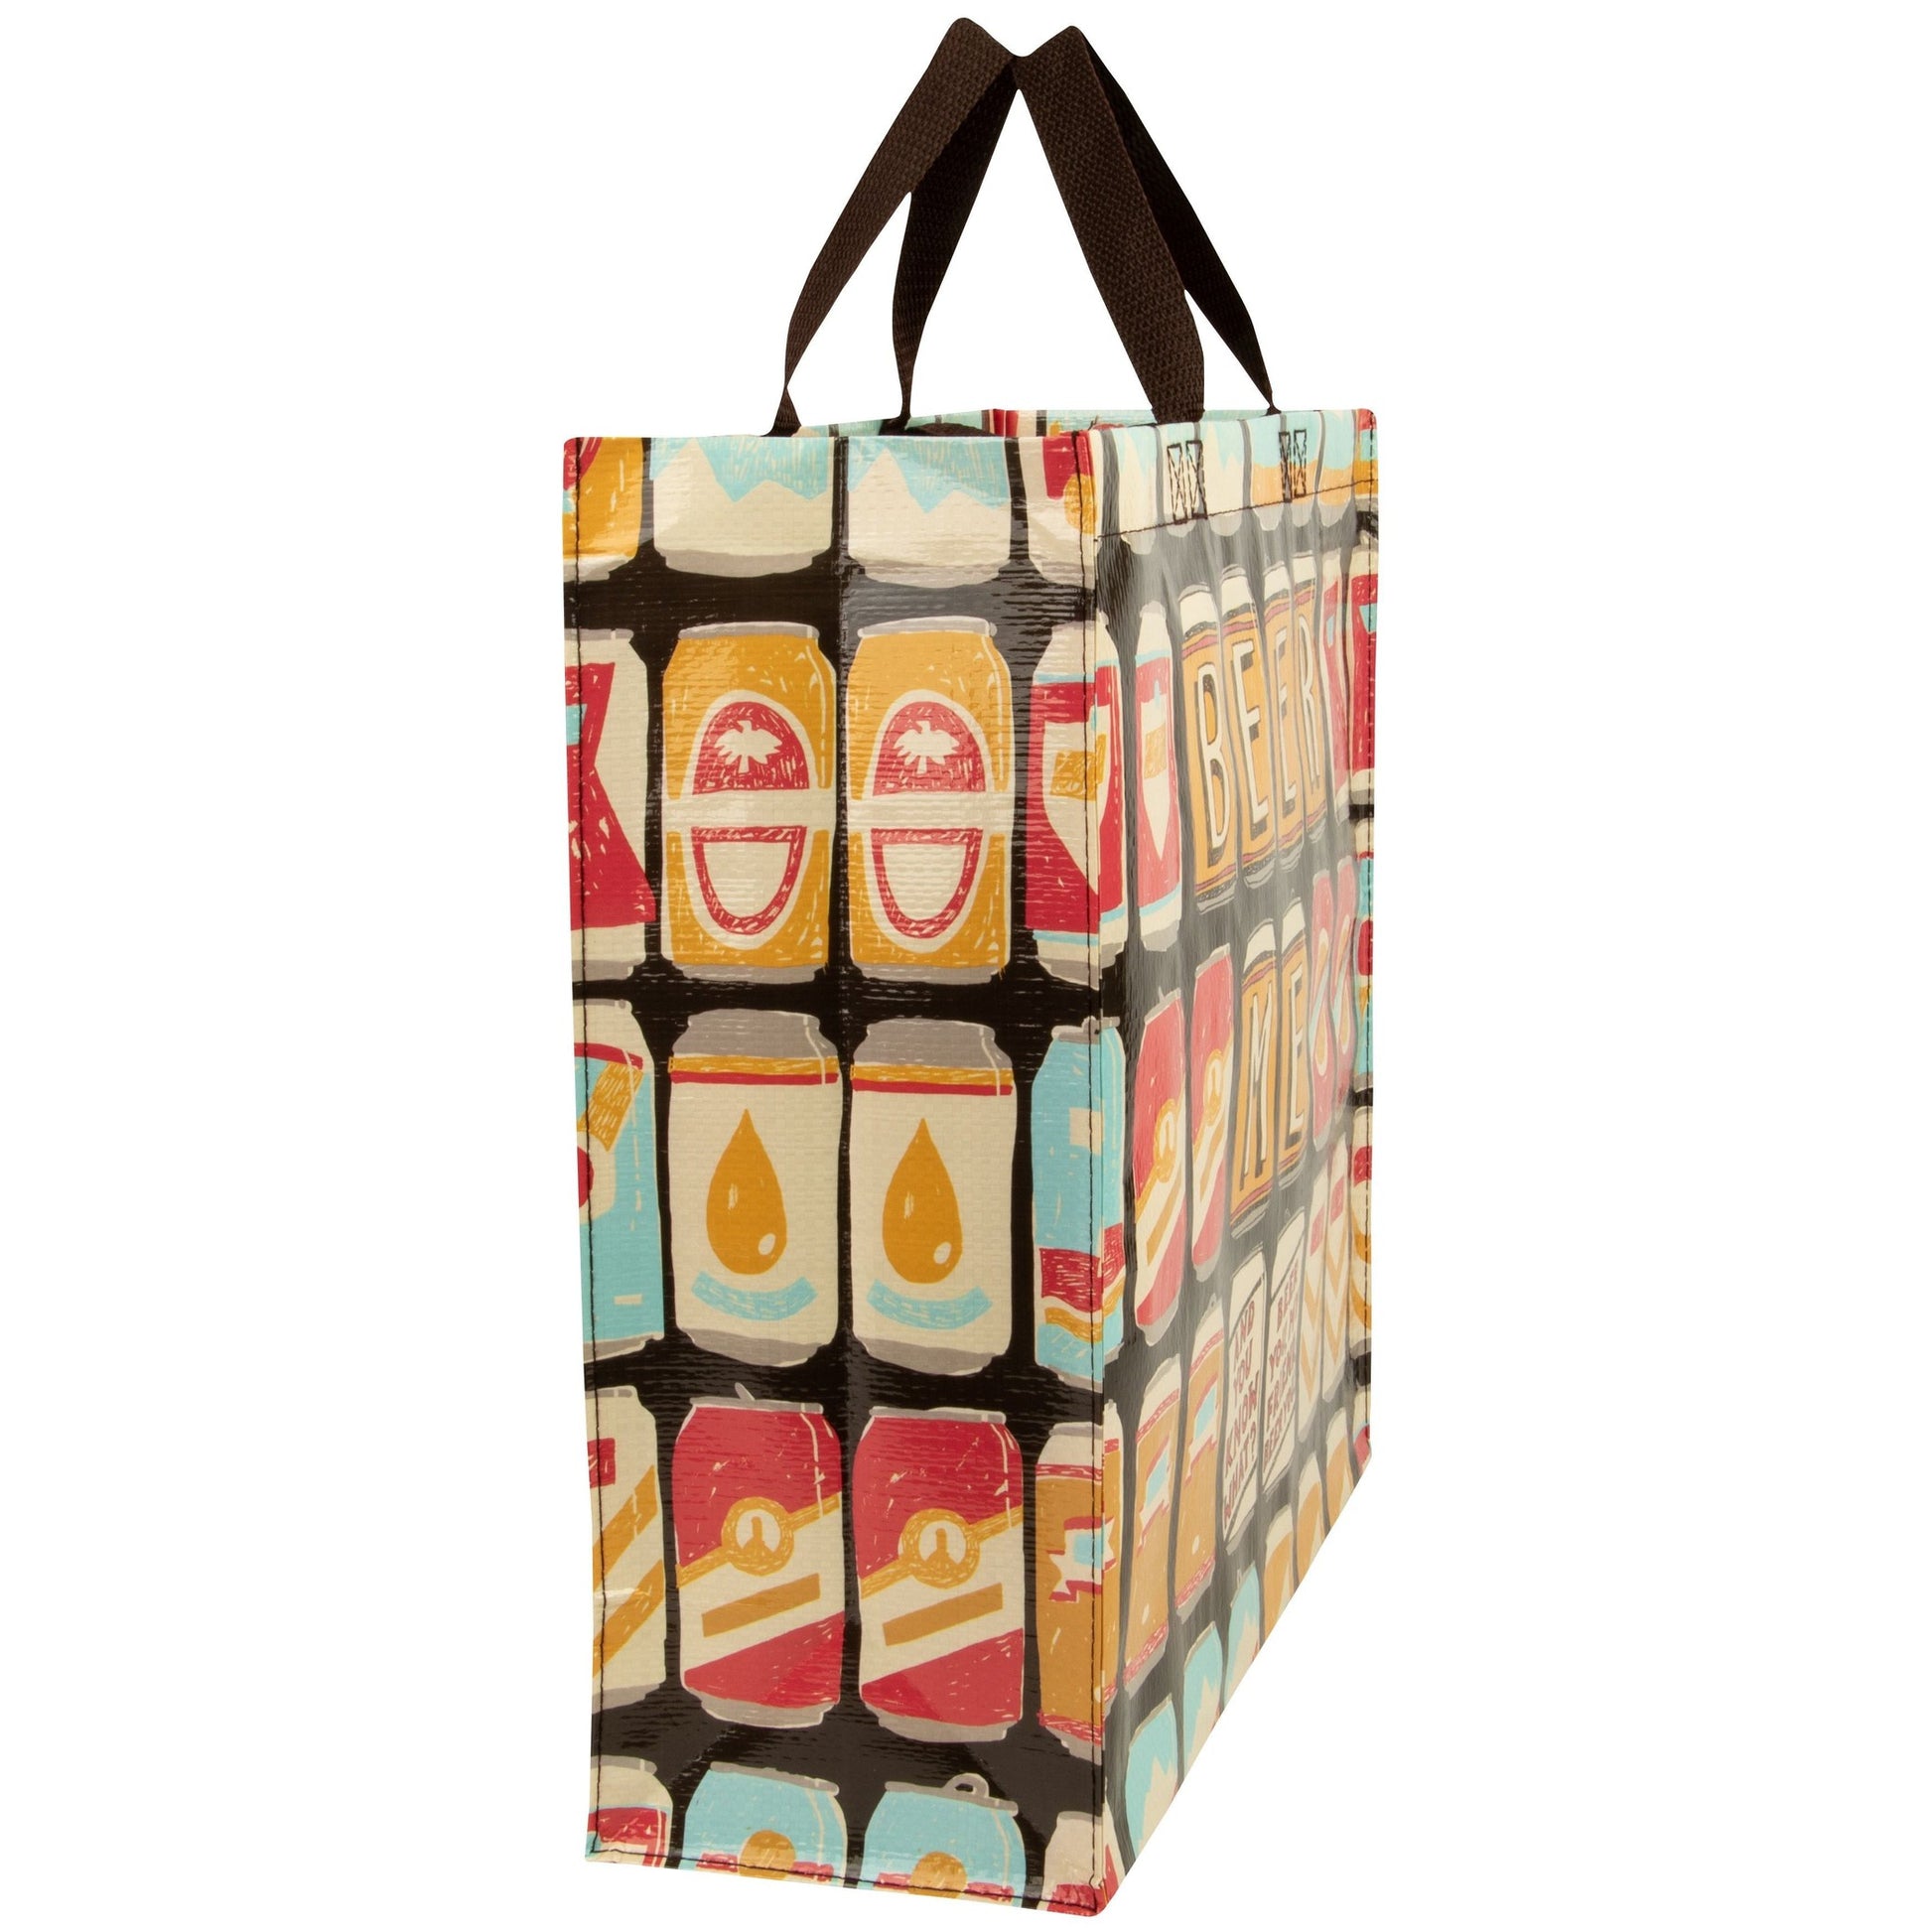 Beer Me. And You Know What? Beer You Shopper Tote Bag | 15" x 16"